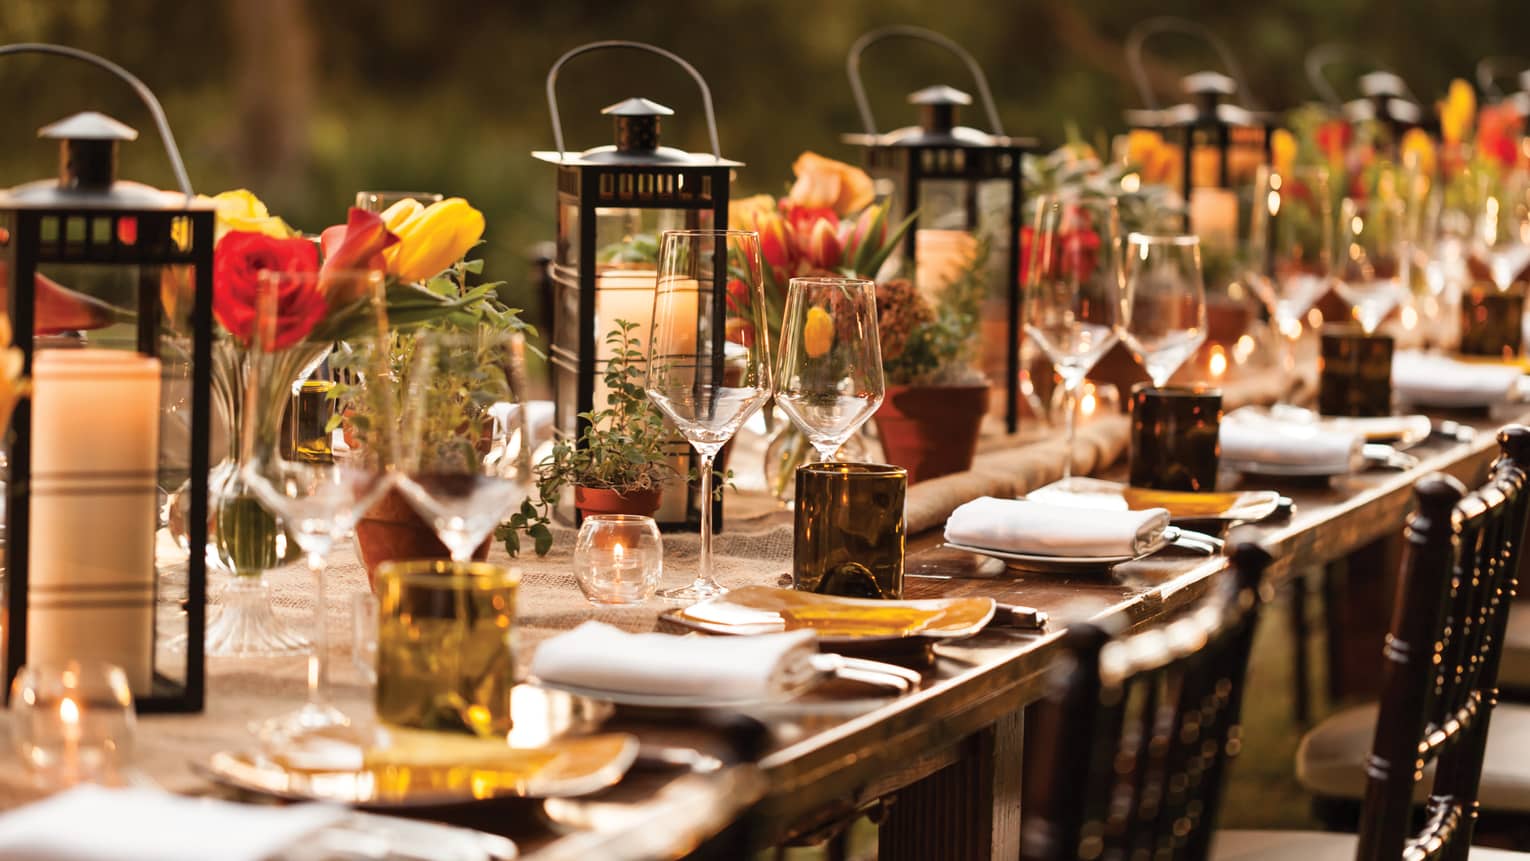 Close-up of long outdoor dining table set with lanterns, candles, wine glasses, flowers